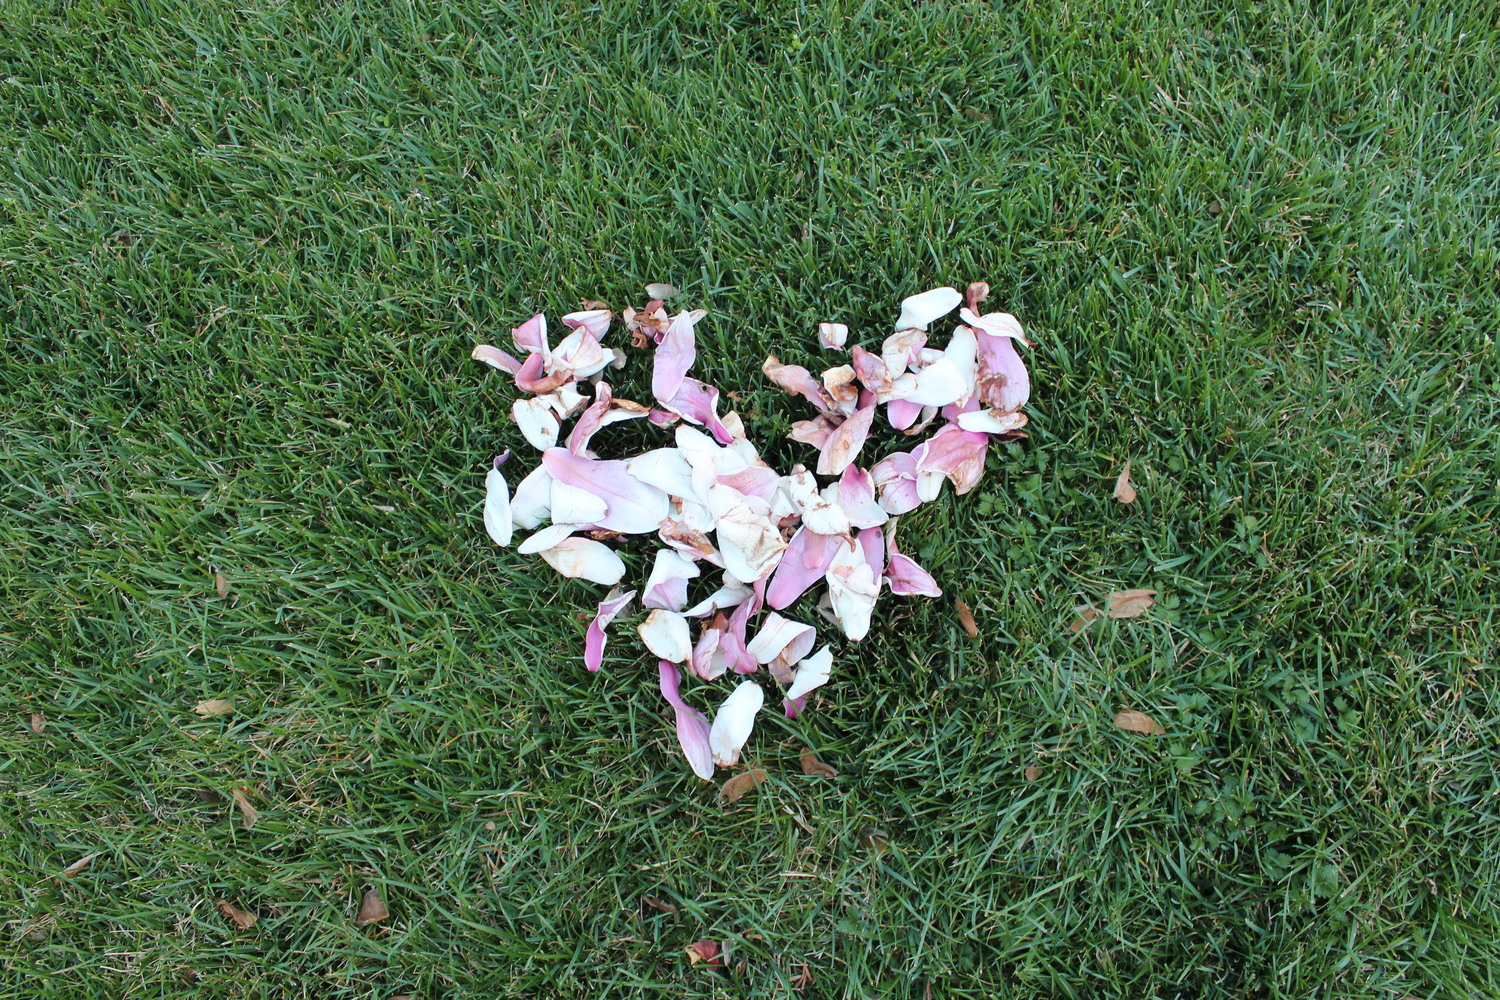 A heart in cherry blossom petals 